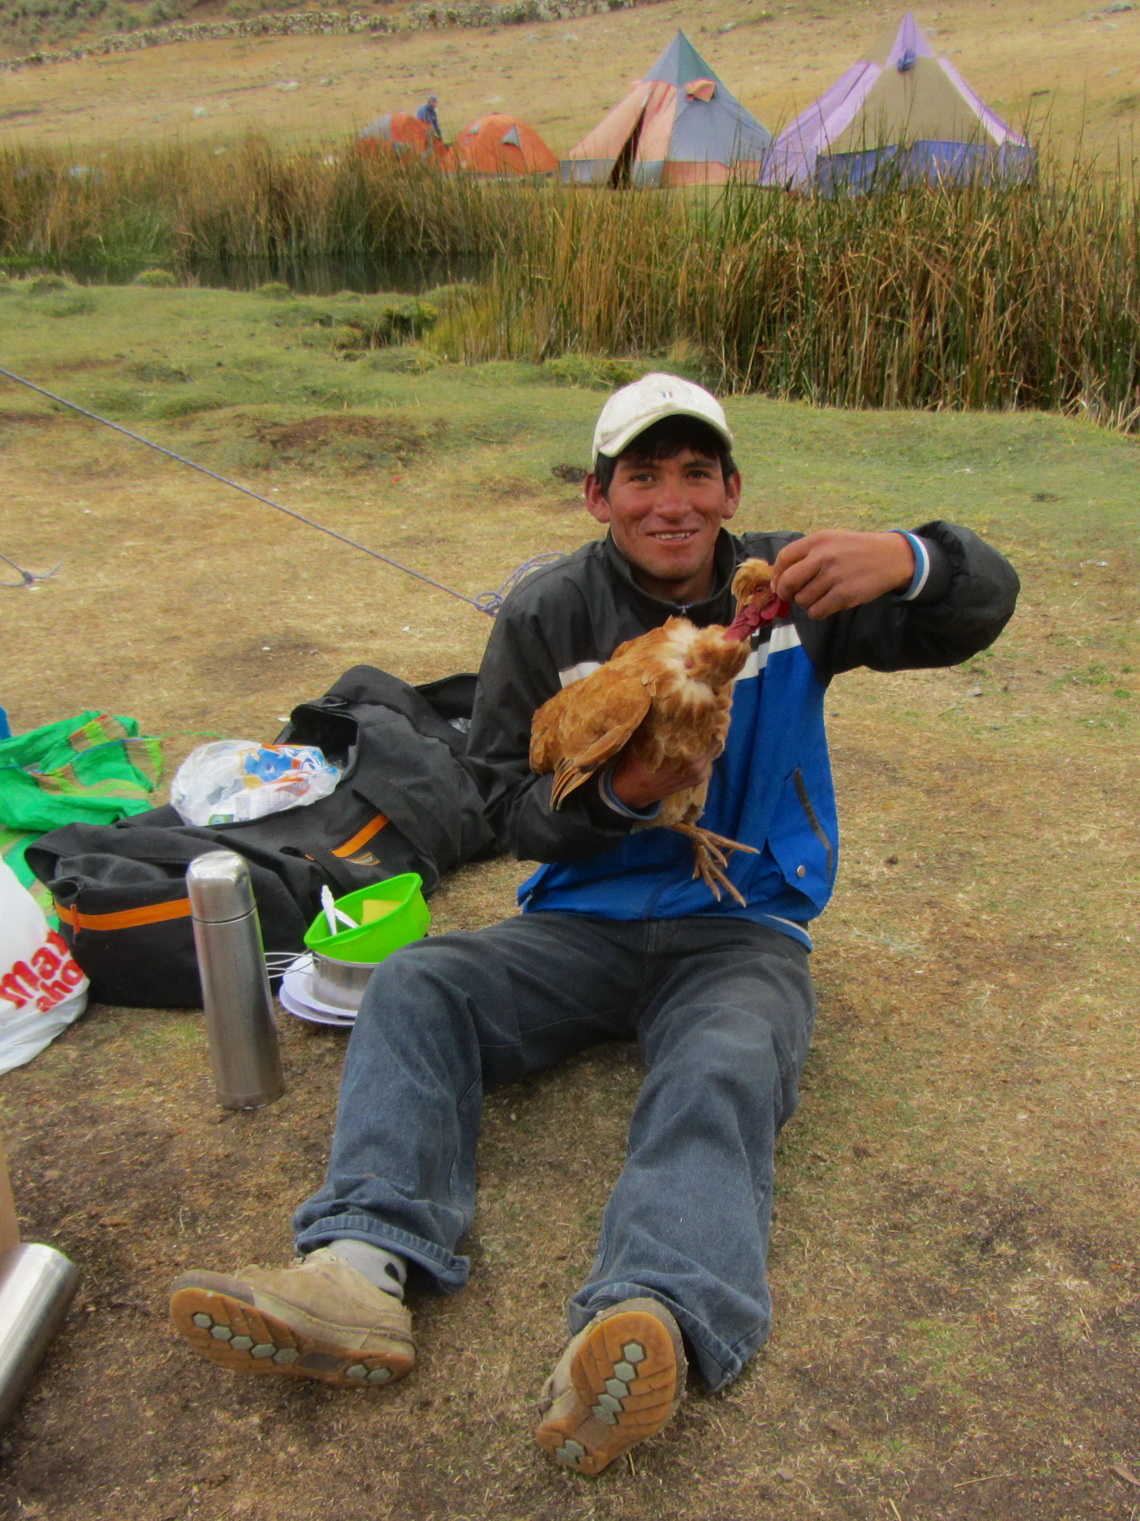 Susman with a chicken in the Jahuacocha camp